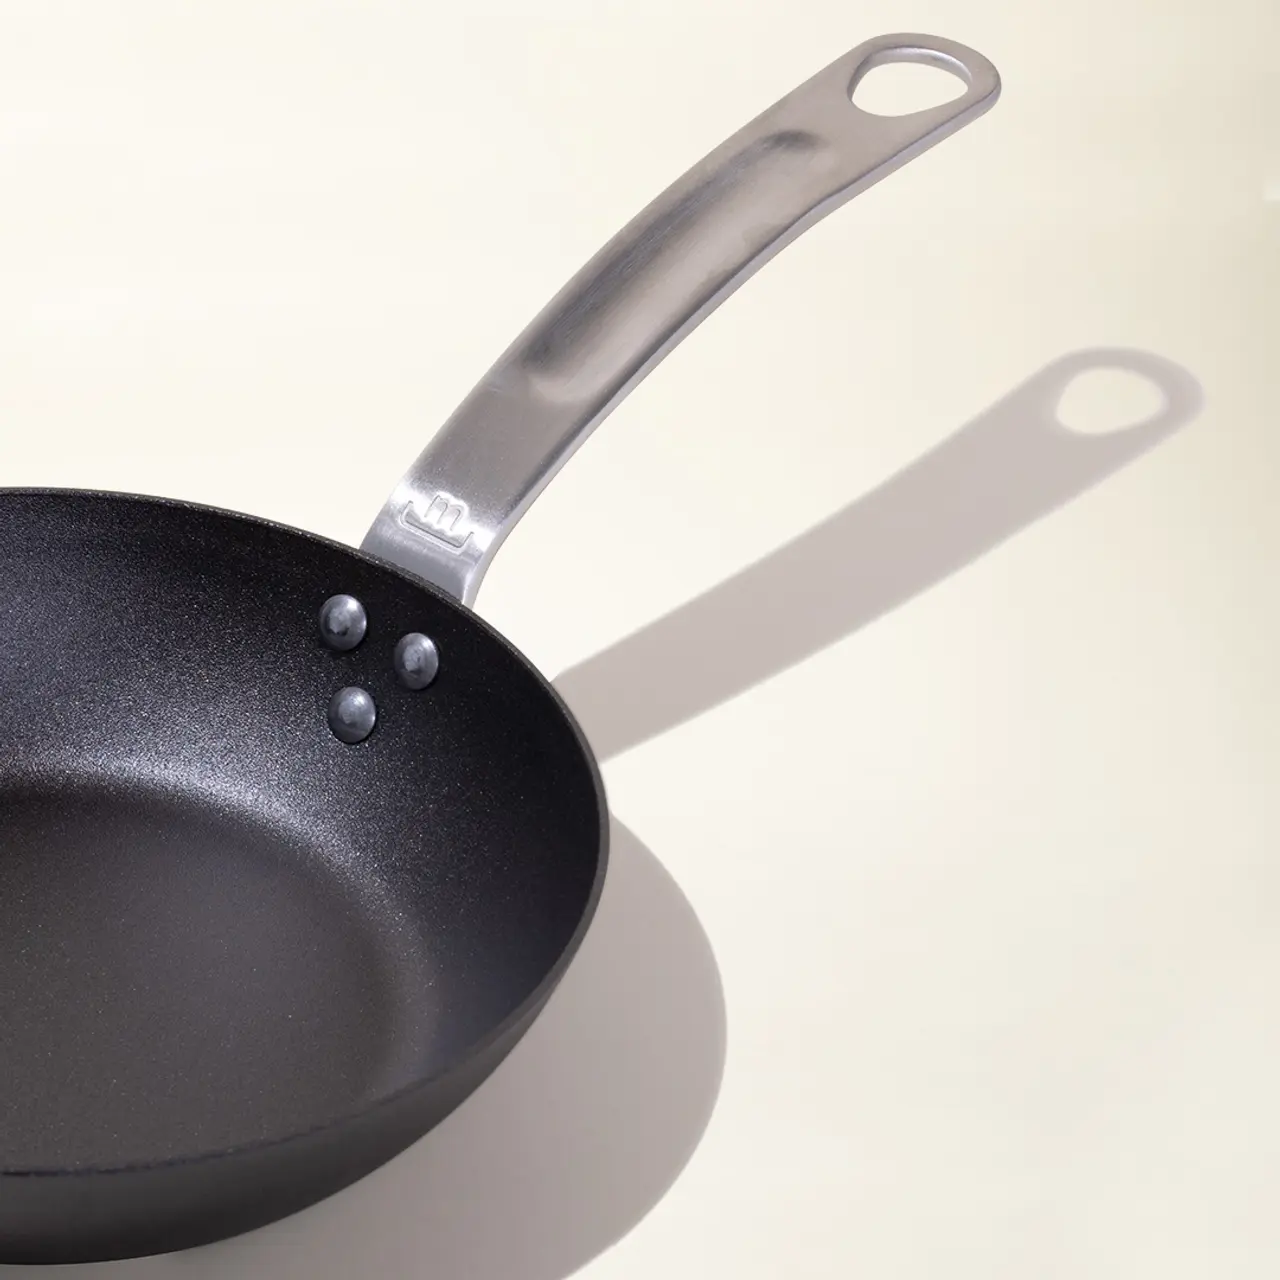 A frying pan casts a shadow on a light surface, suggesting it is placed under a focused light source.